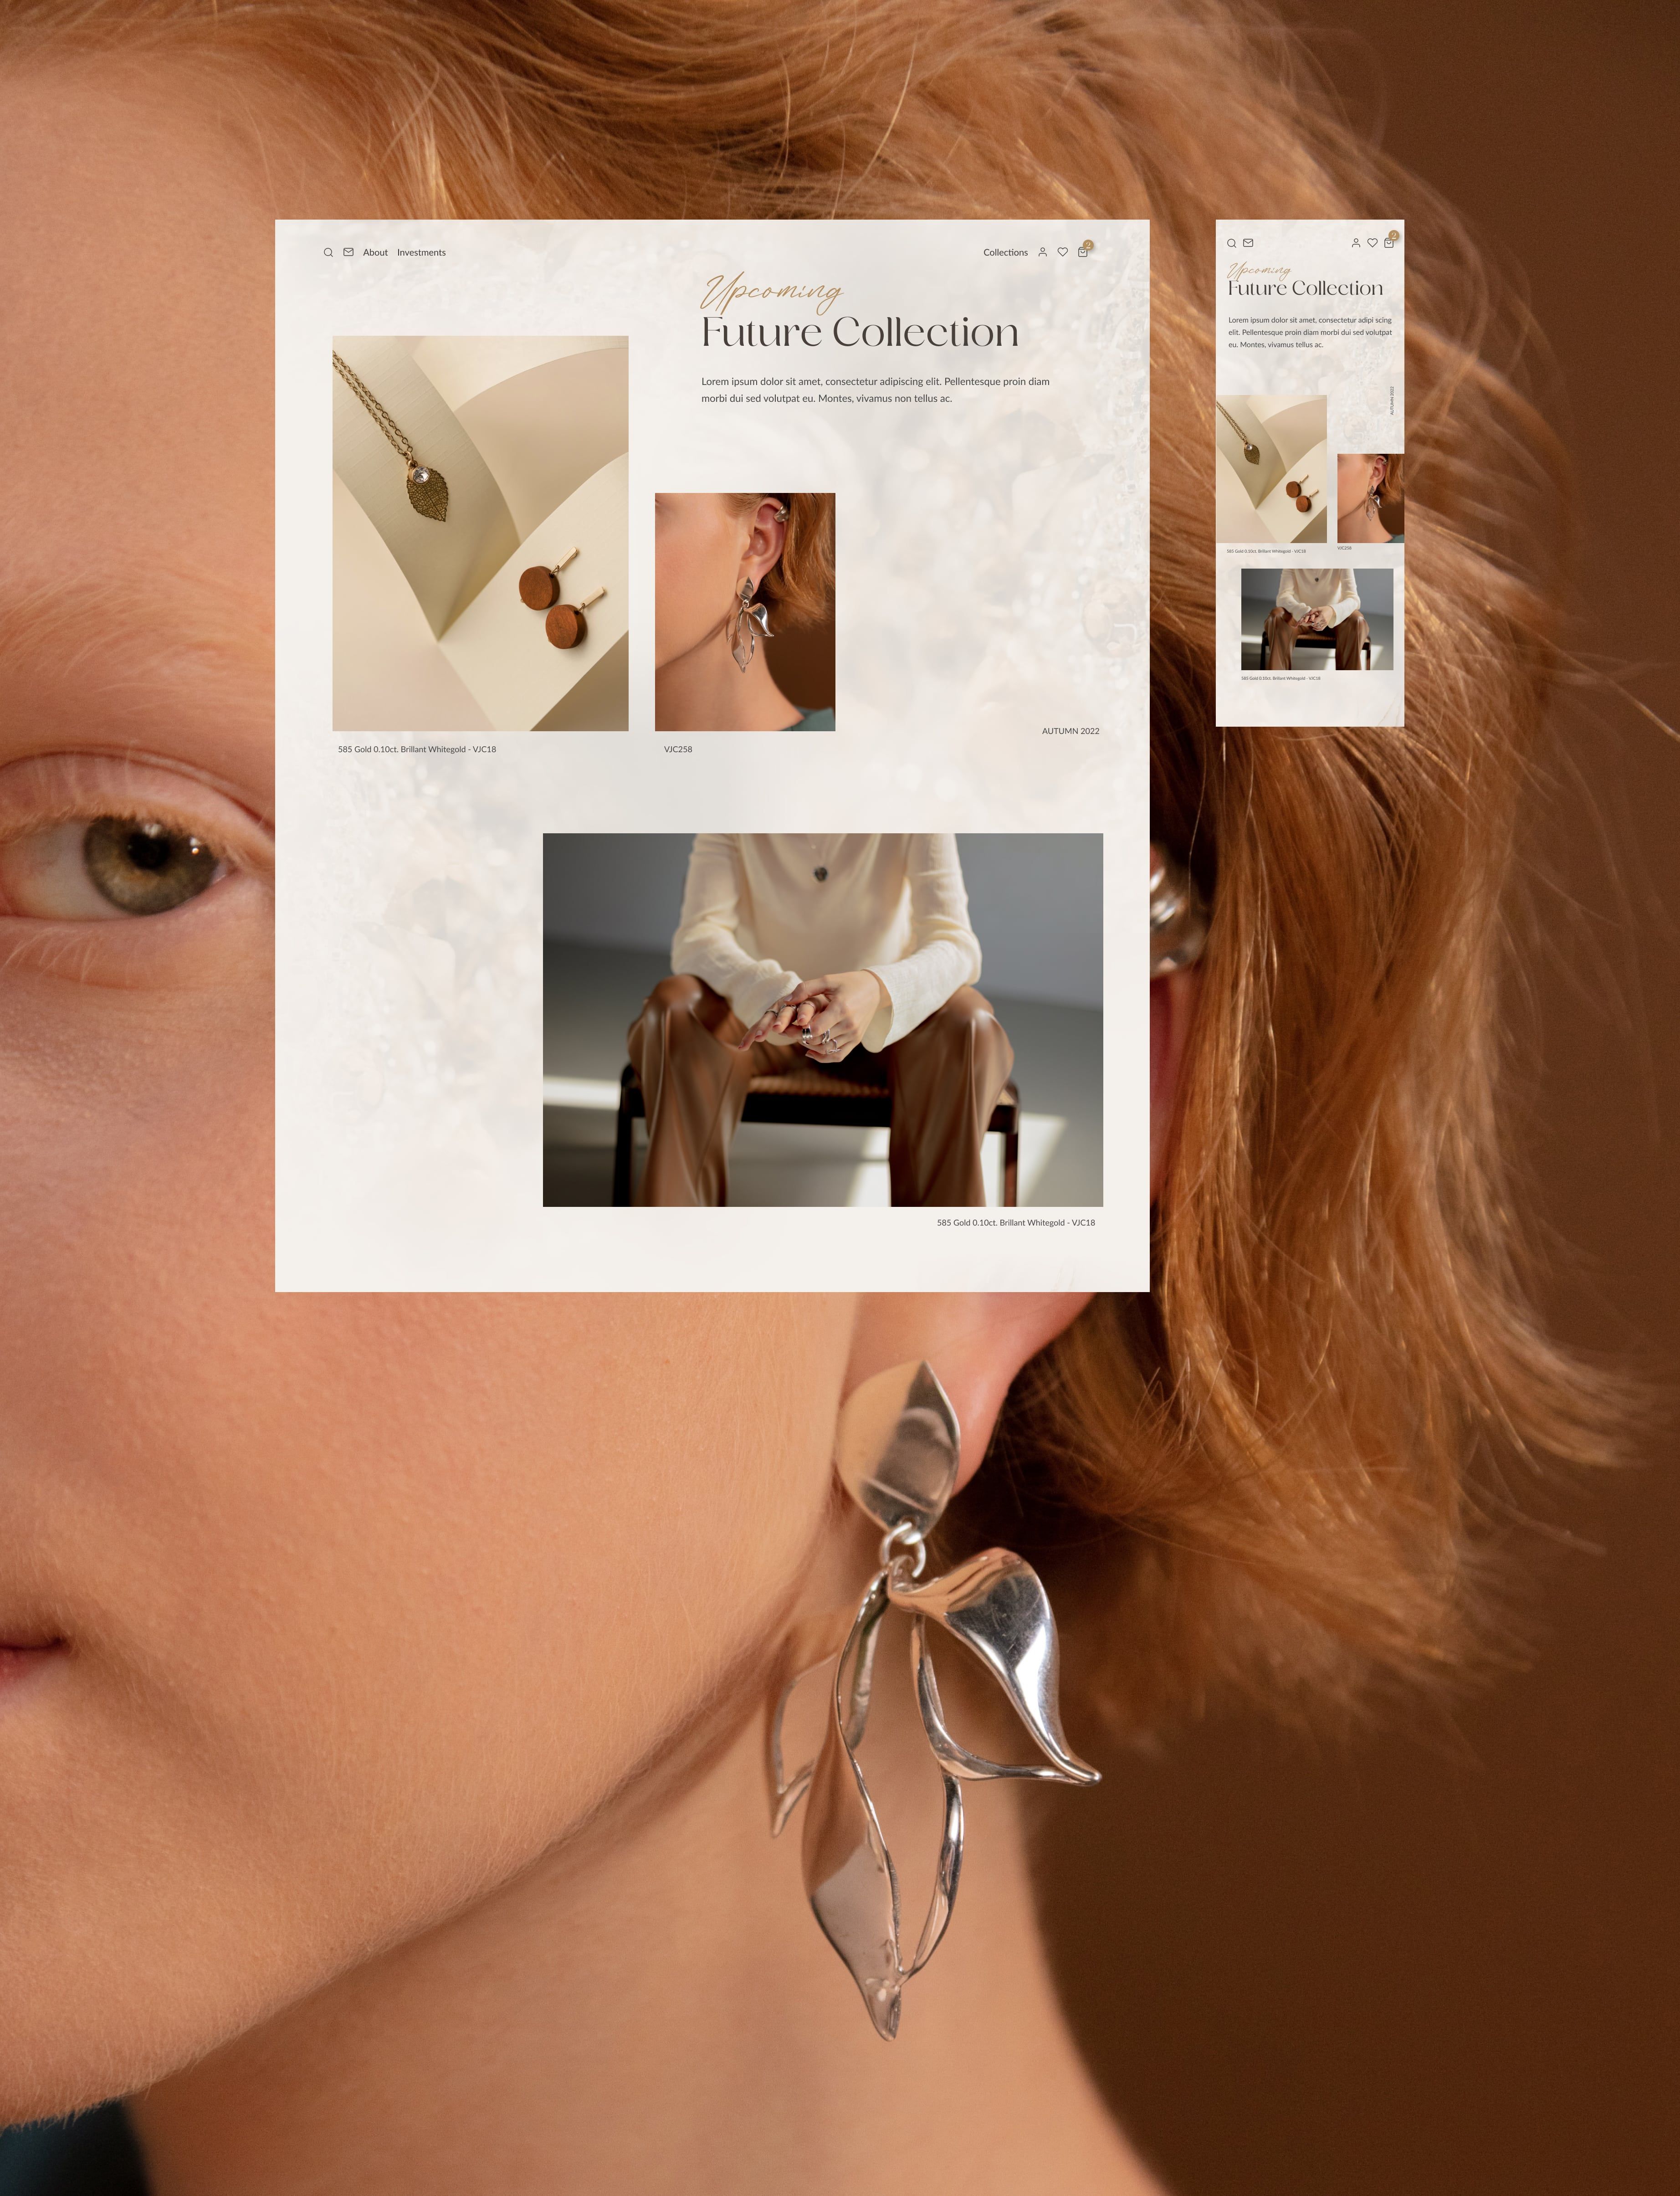 Preview section for upcoming future collections:desktop & mobile. In the background woman wearing unique collection earrings